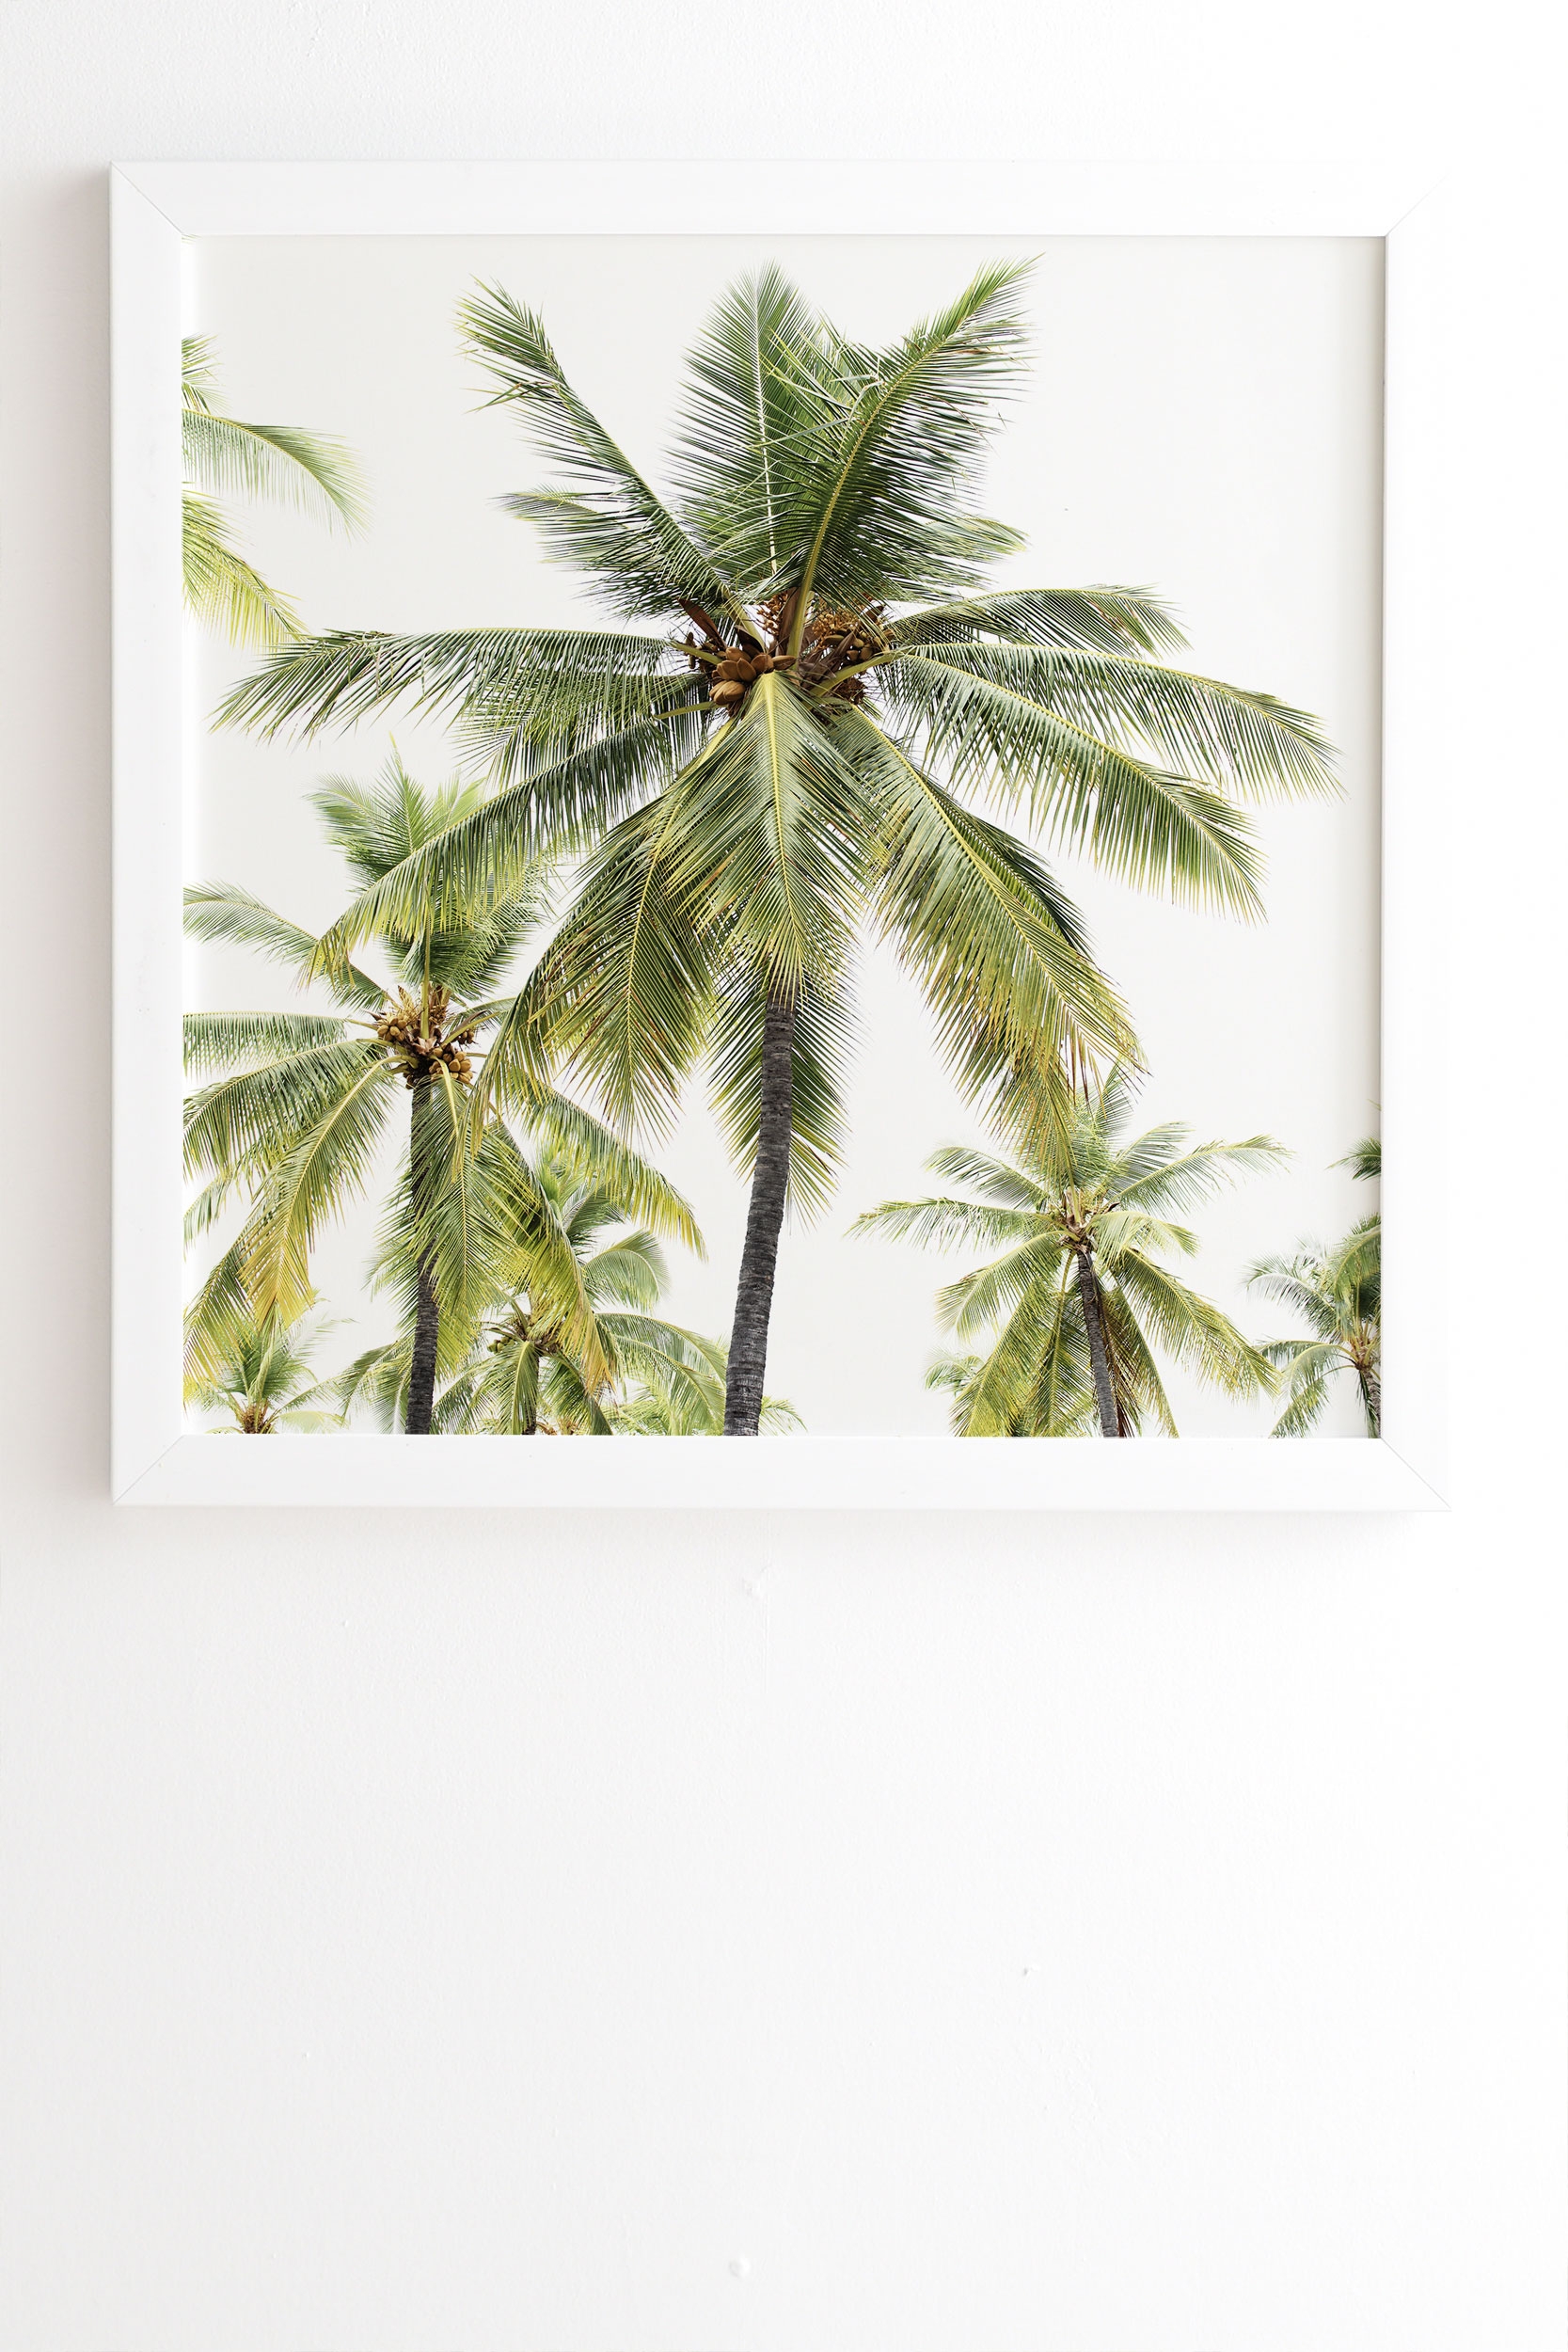 Coconut Palms by Bree Madden - Framed Wall Art Basic White 8" x 9.5" - Image 1